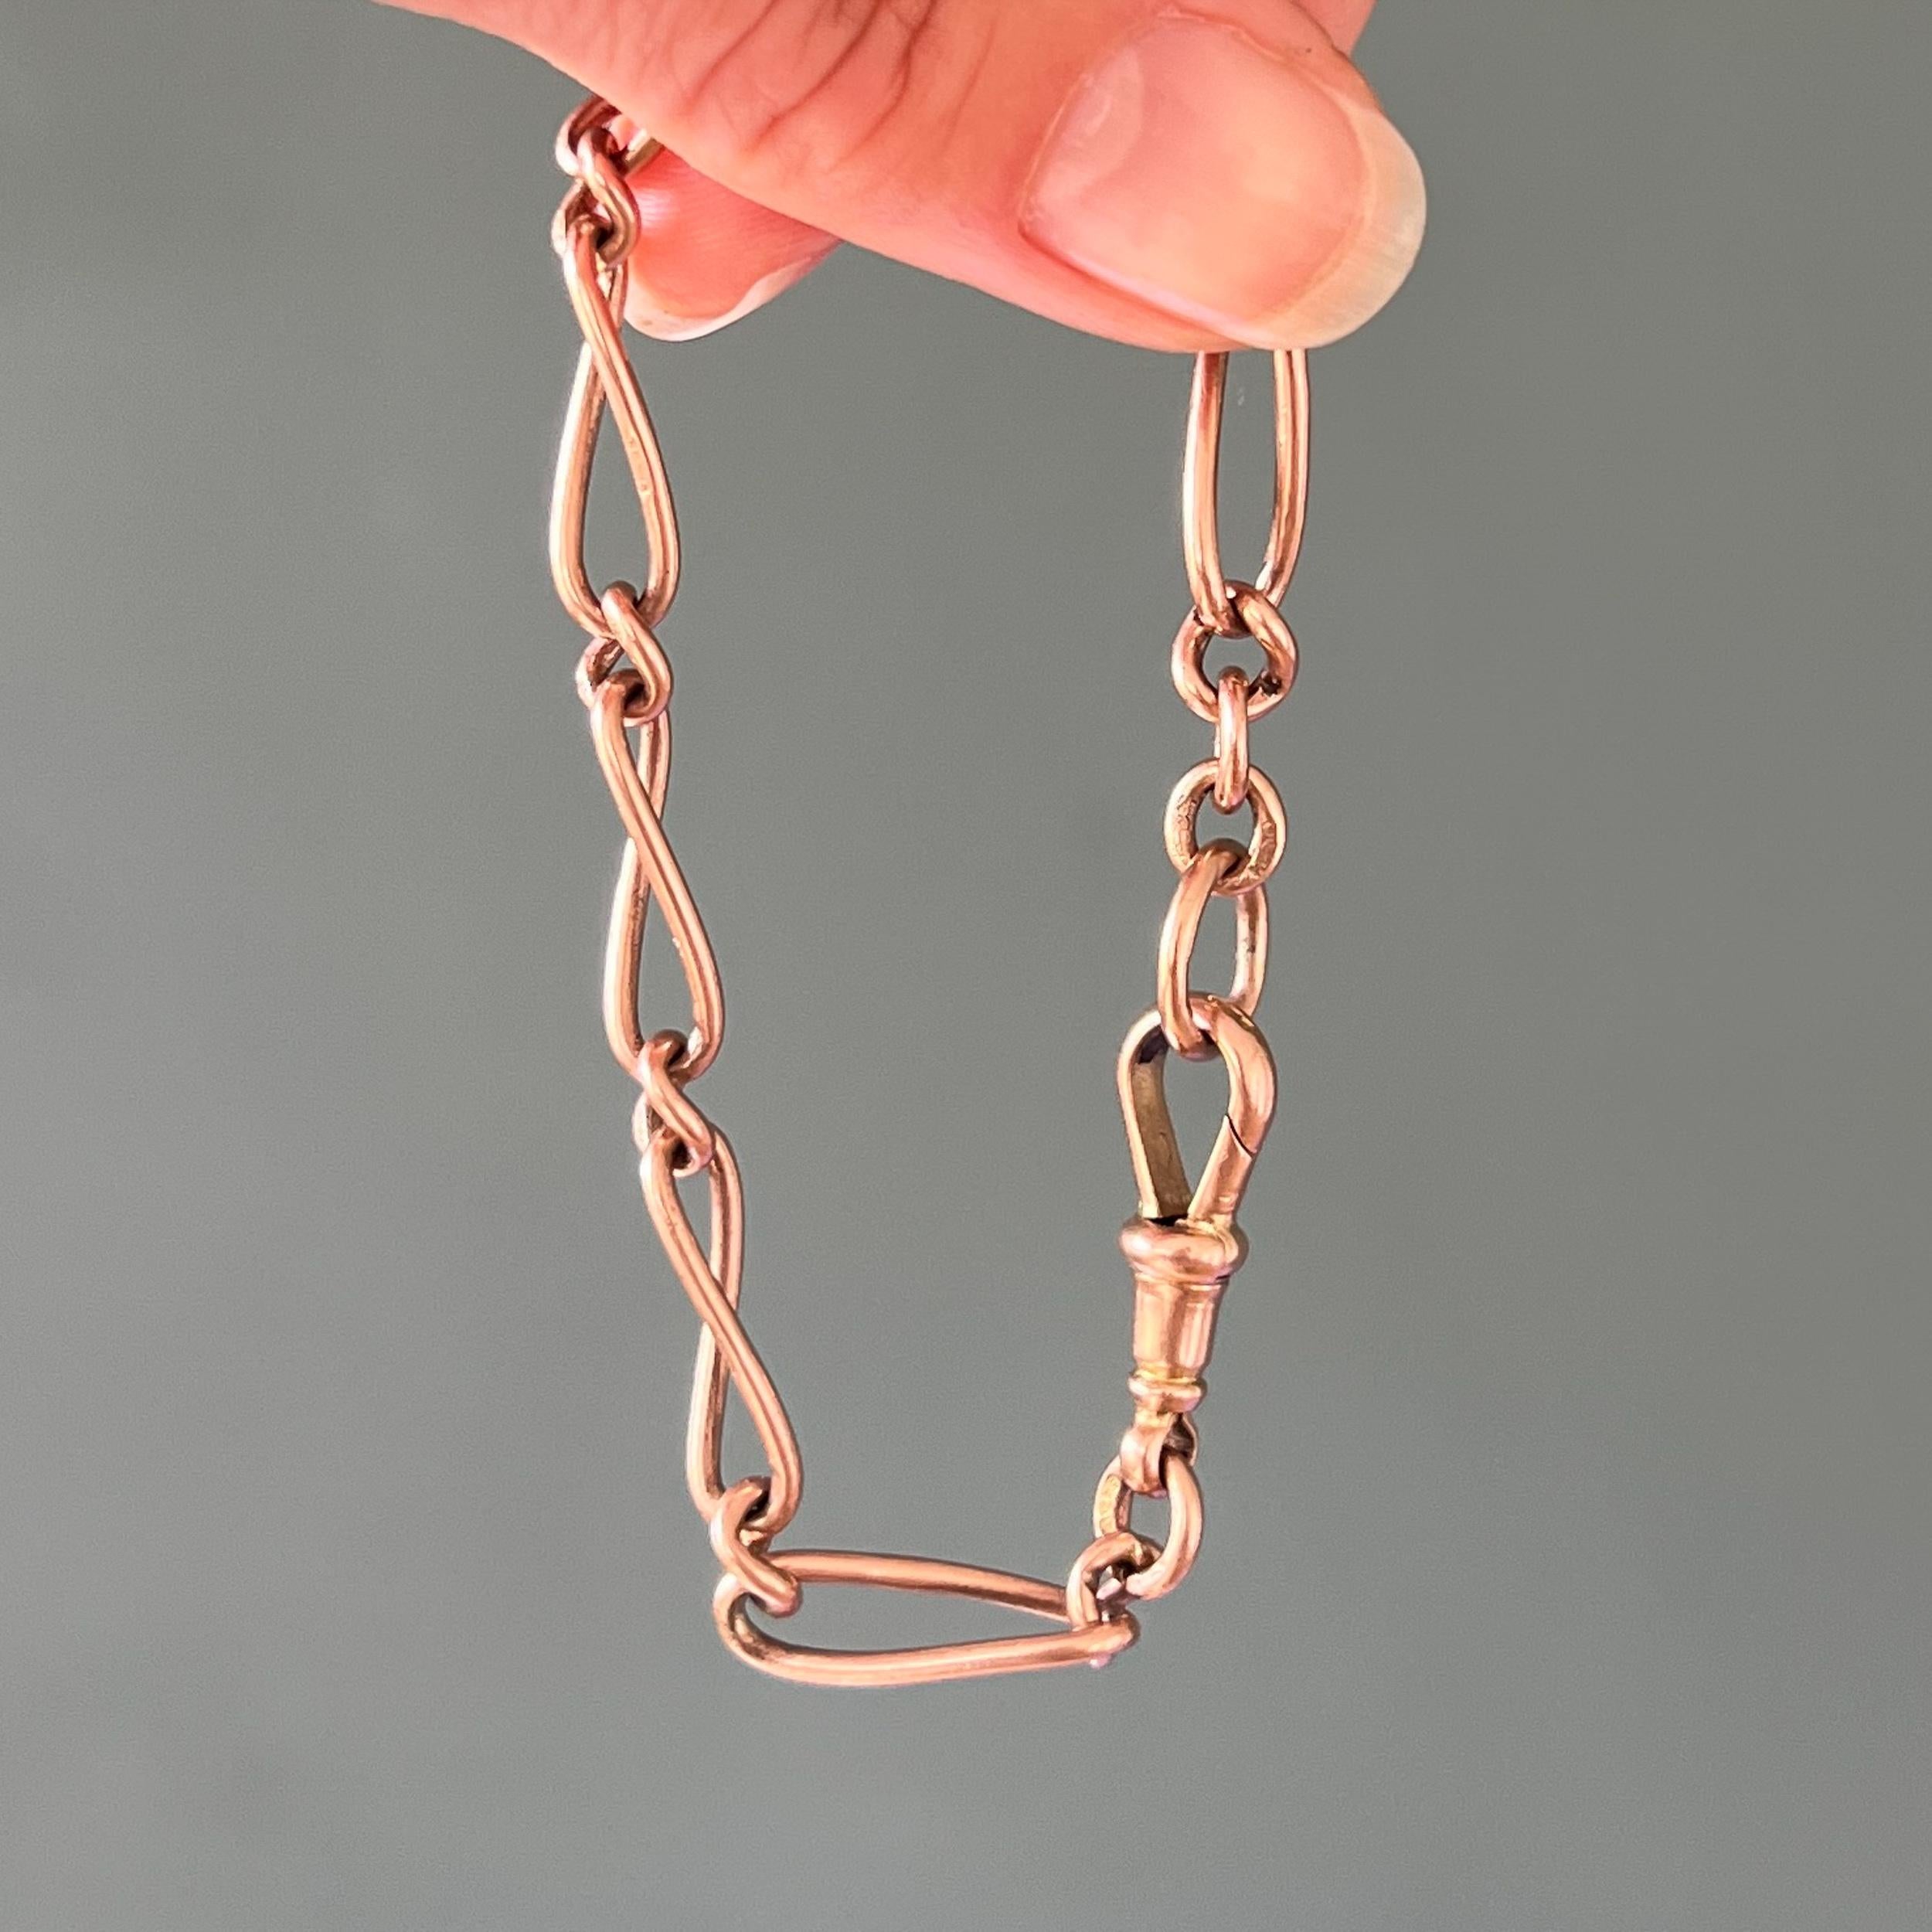 An antique Edwardian Albert chain bracelet made from solid 9 carat gold curb links that have a beautiful rose gold hue with a twisted oval design. Each link is marked 375 which stands for 9 carat gold. The chain is provided with an antique swivel